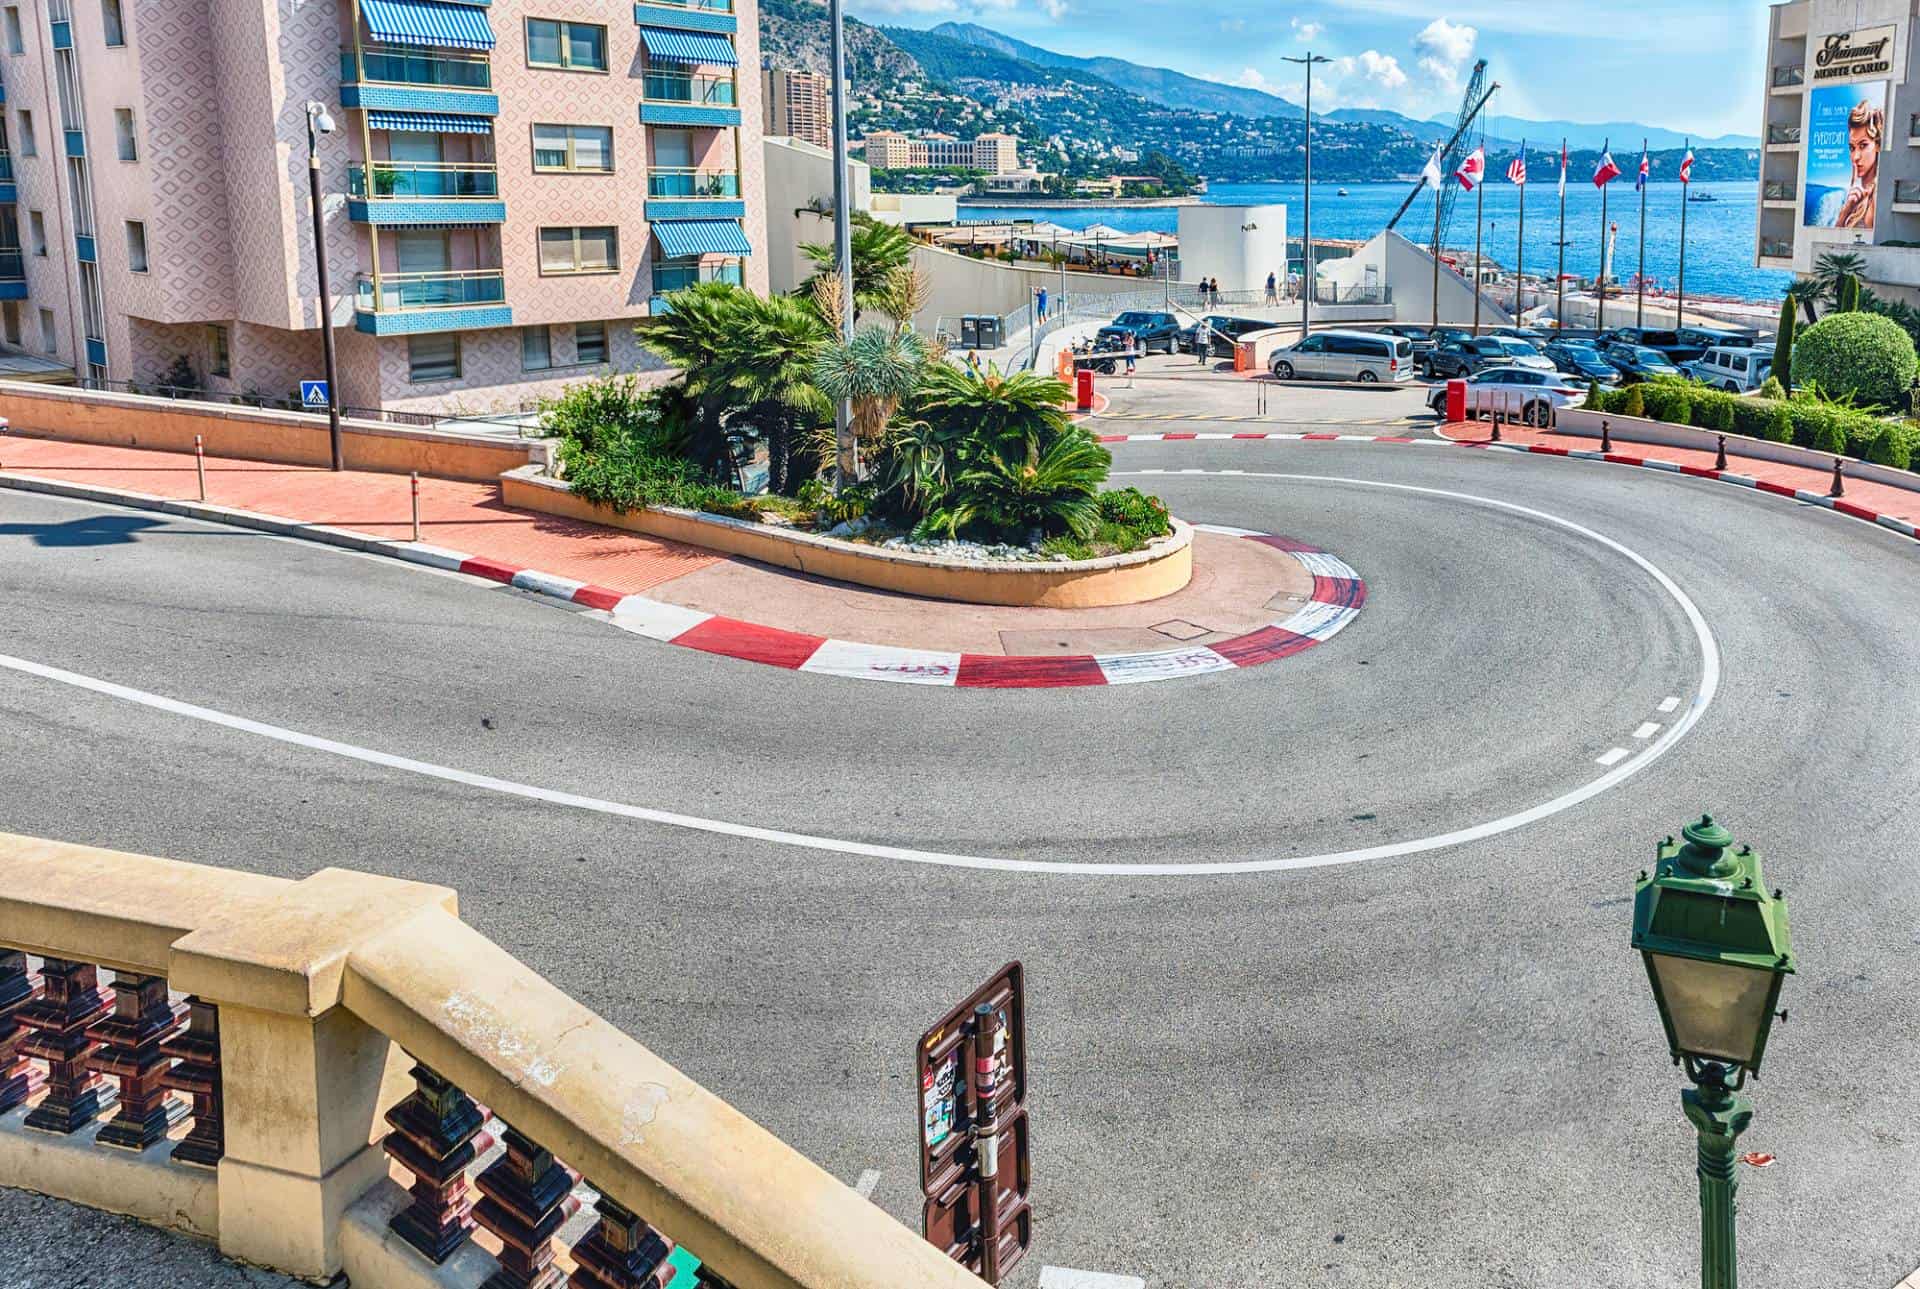 The Fairmont Hairpin, one of the most famous sections of the Monaco F1 Grand Prix circuit, located in Monte Carlo, Monaco.